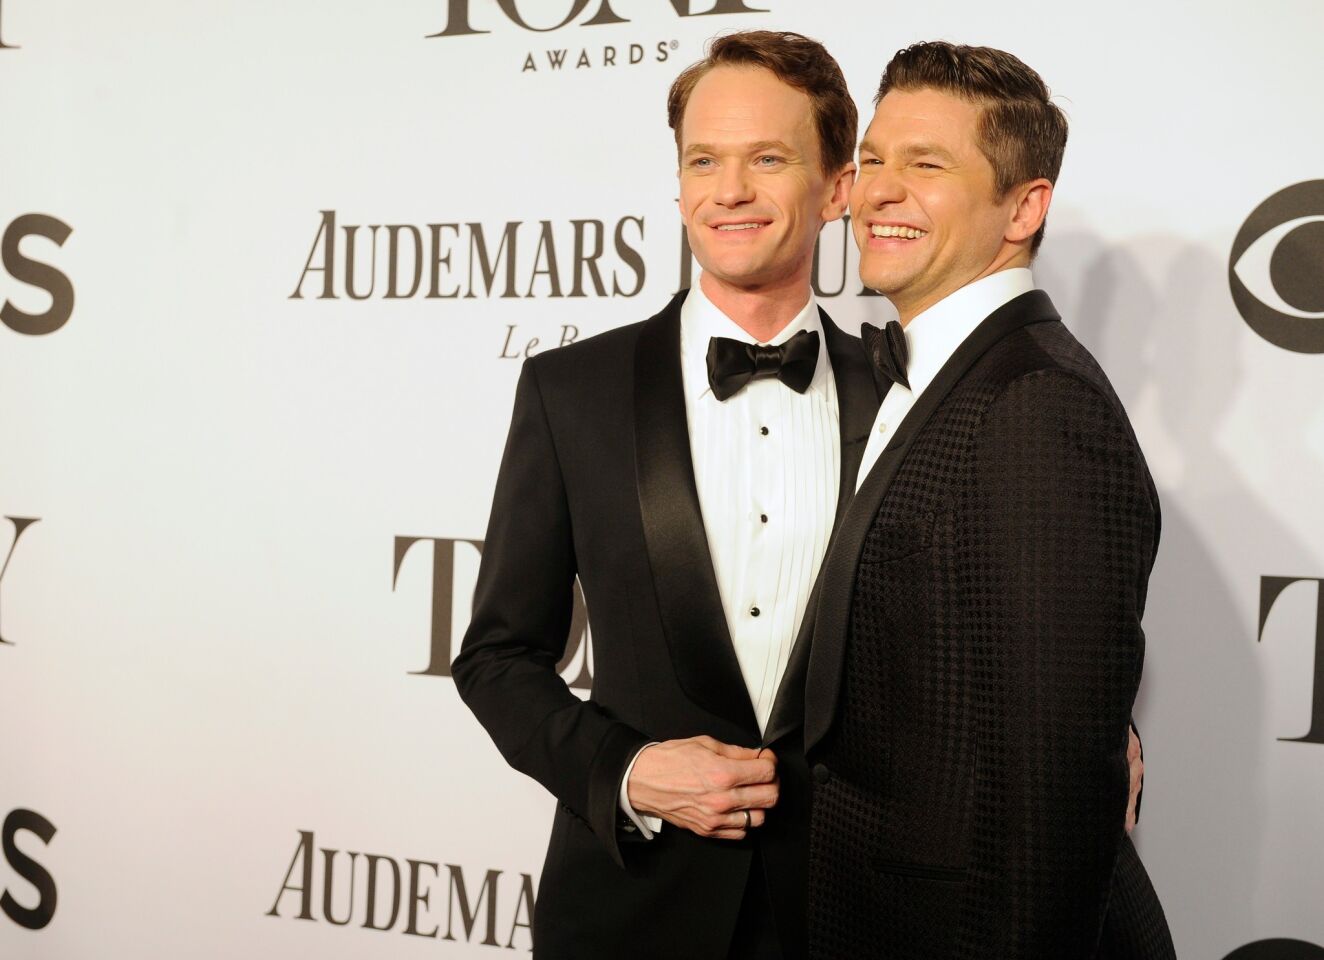 "How I Met Your Mother" star Neil Patrick Harris married his partner of 10-plus years in Italy in September. Director Pam Fryman officiated the ceremony and Elton John performed at the reception. Harris, 41, and actor-chef Burtka, 39, sported custom Tom Ford tuxedos.